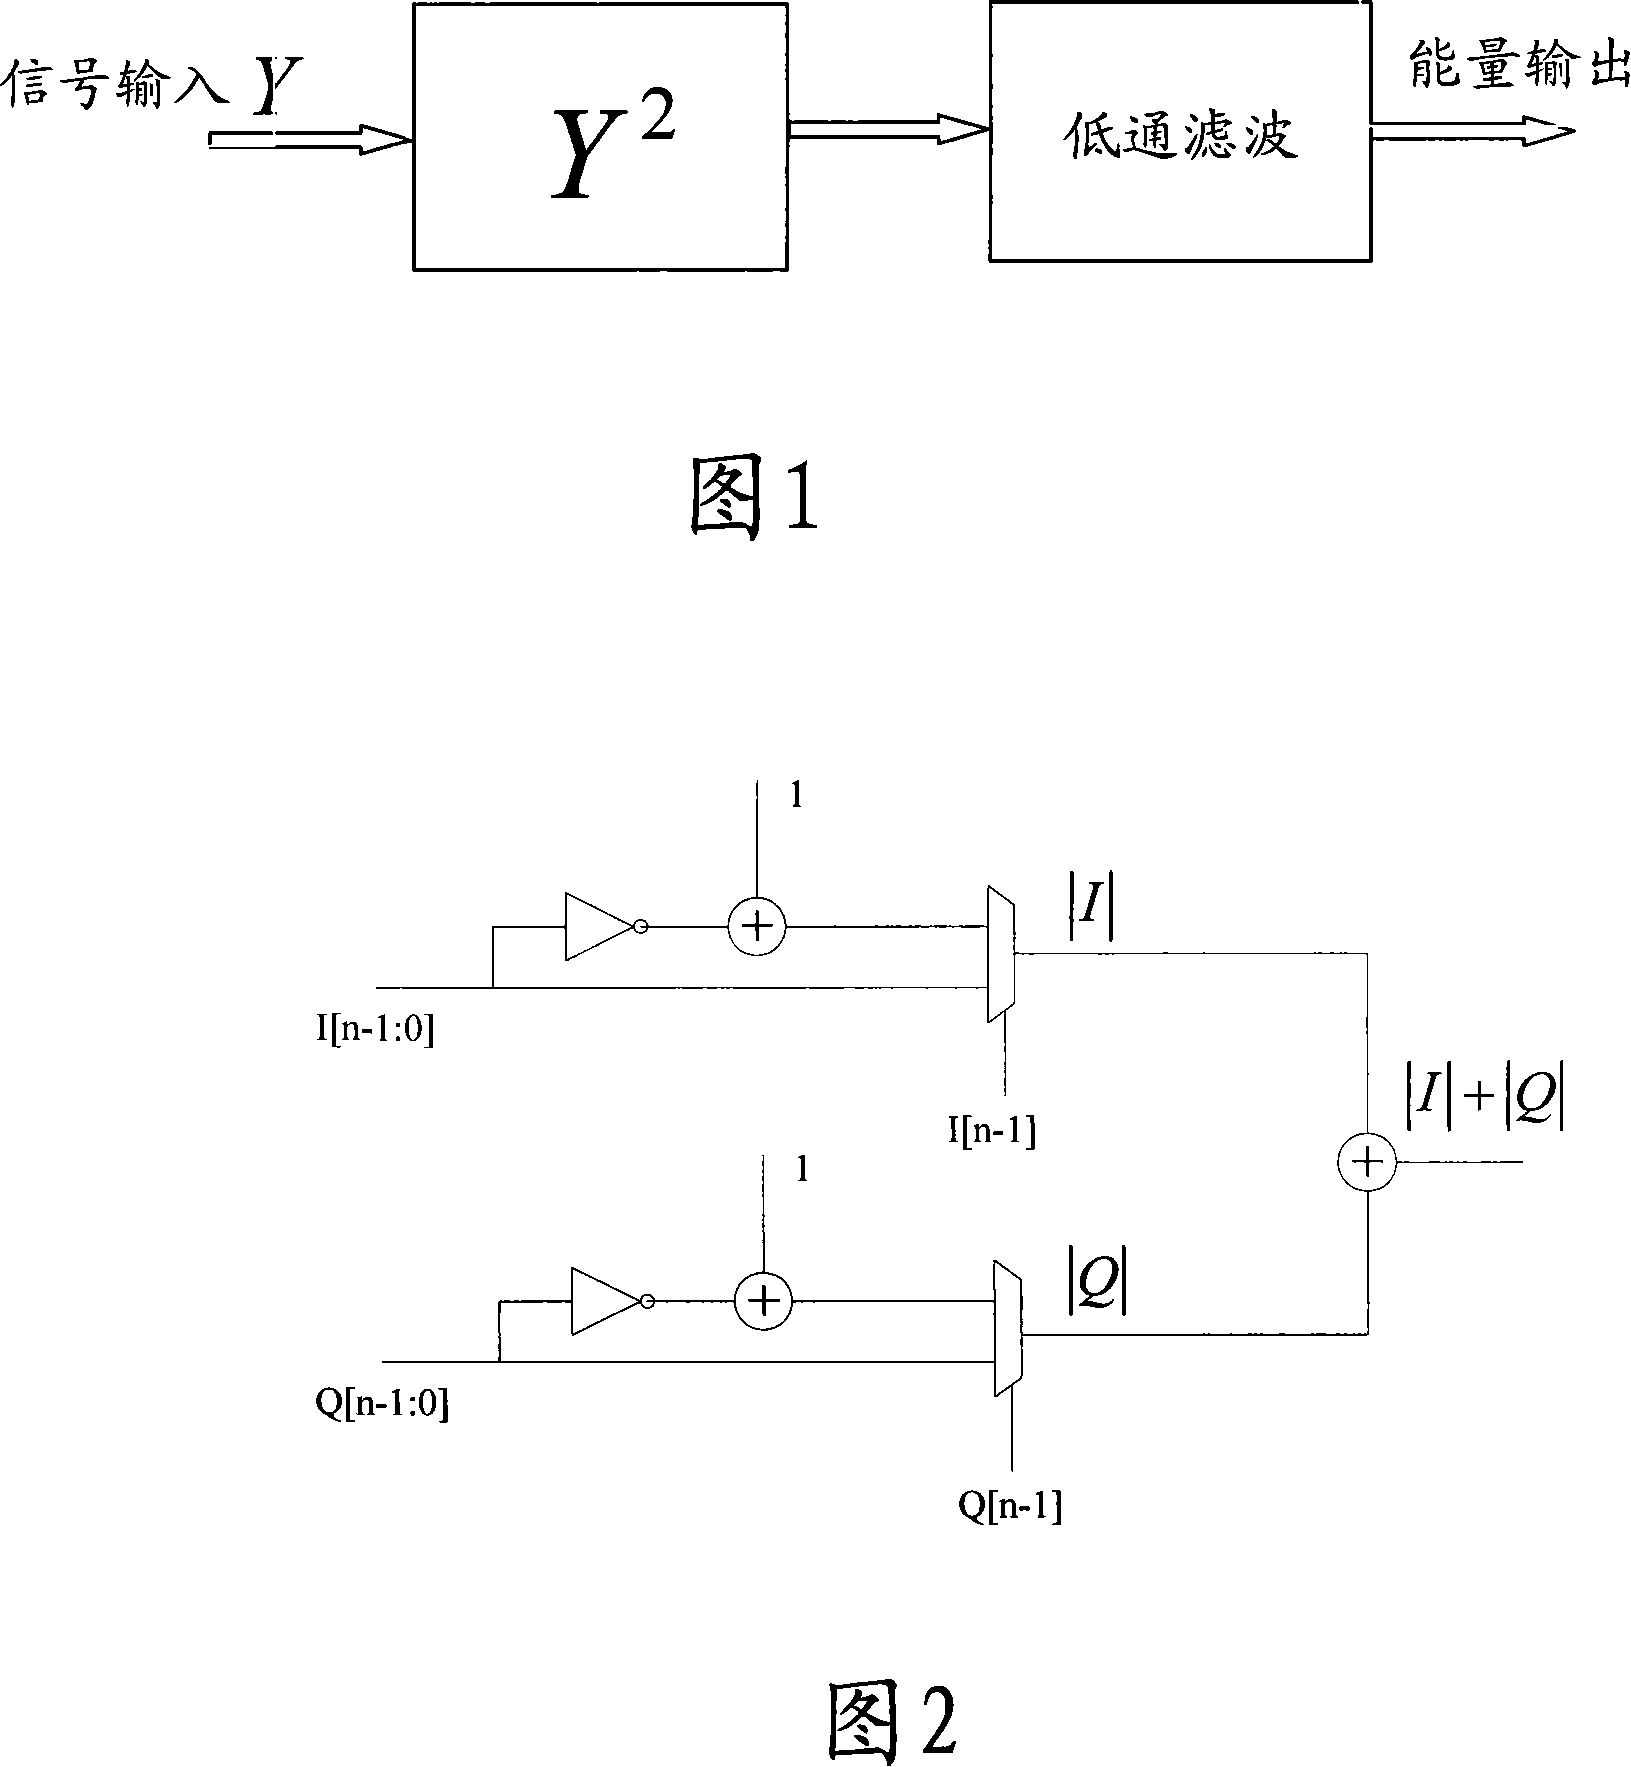 Circuit for calculating energy of orthogonal signal